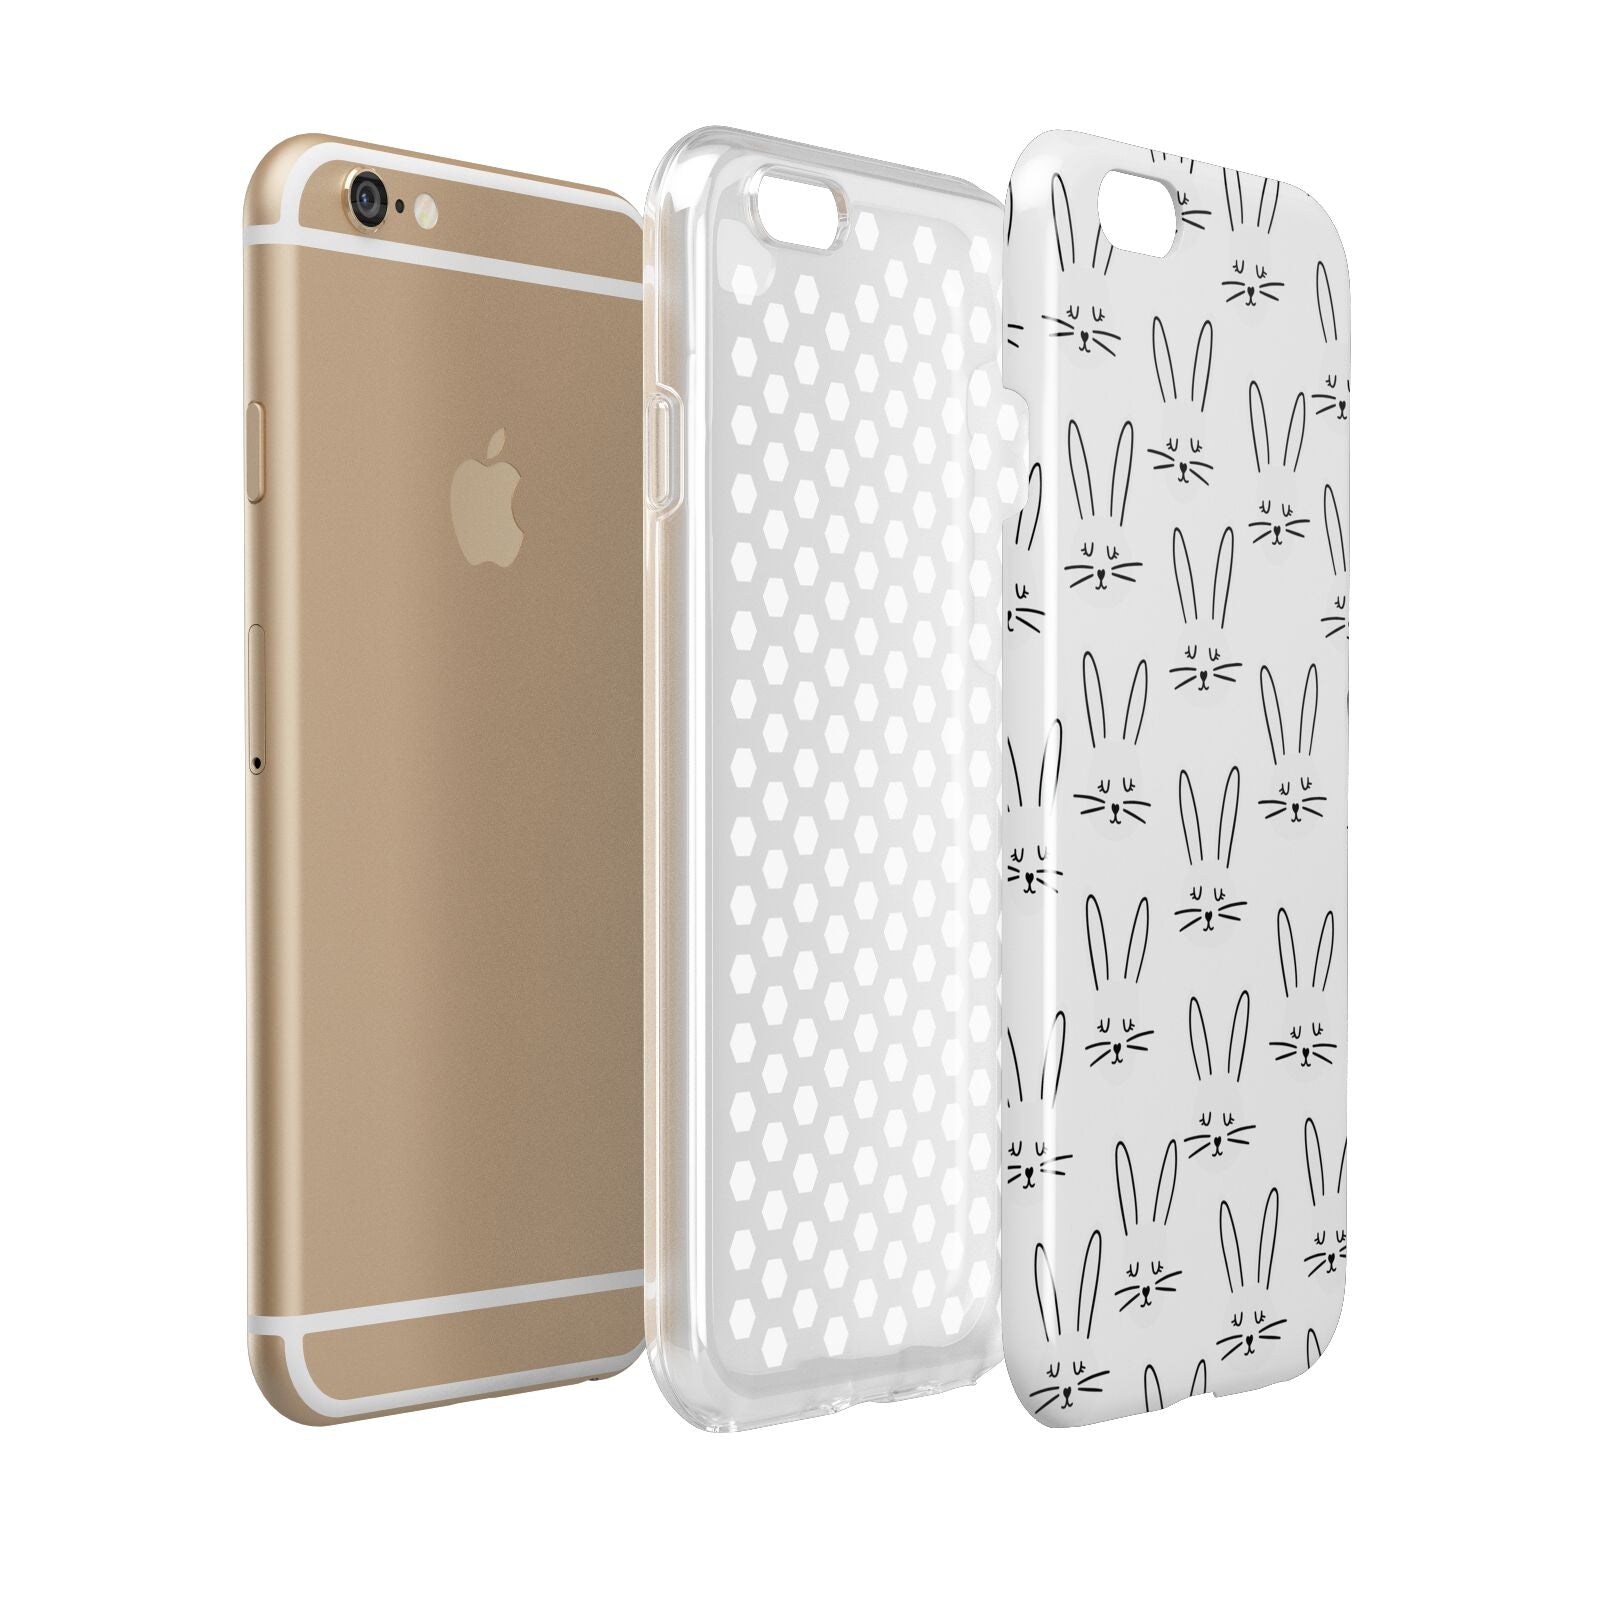 Easter Bunny Apple iPhone 6 3D Tough Case Expanded view